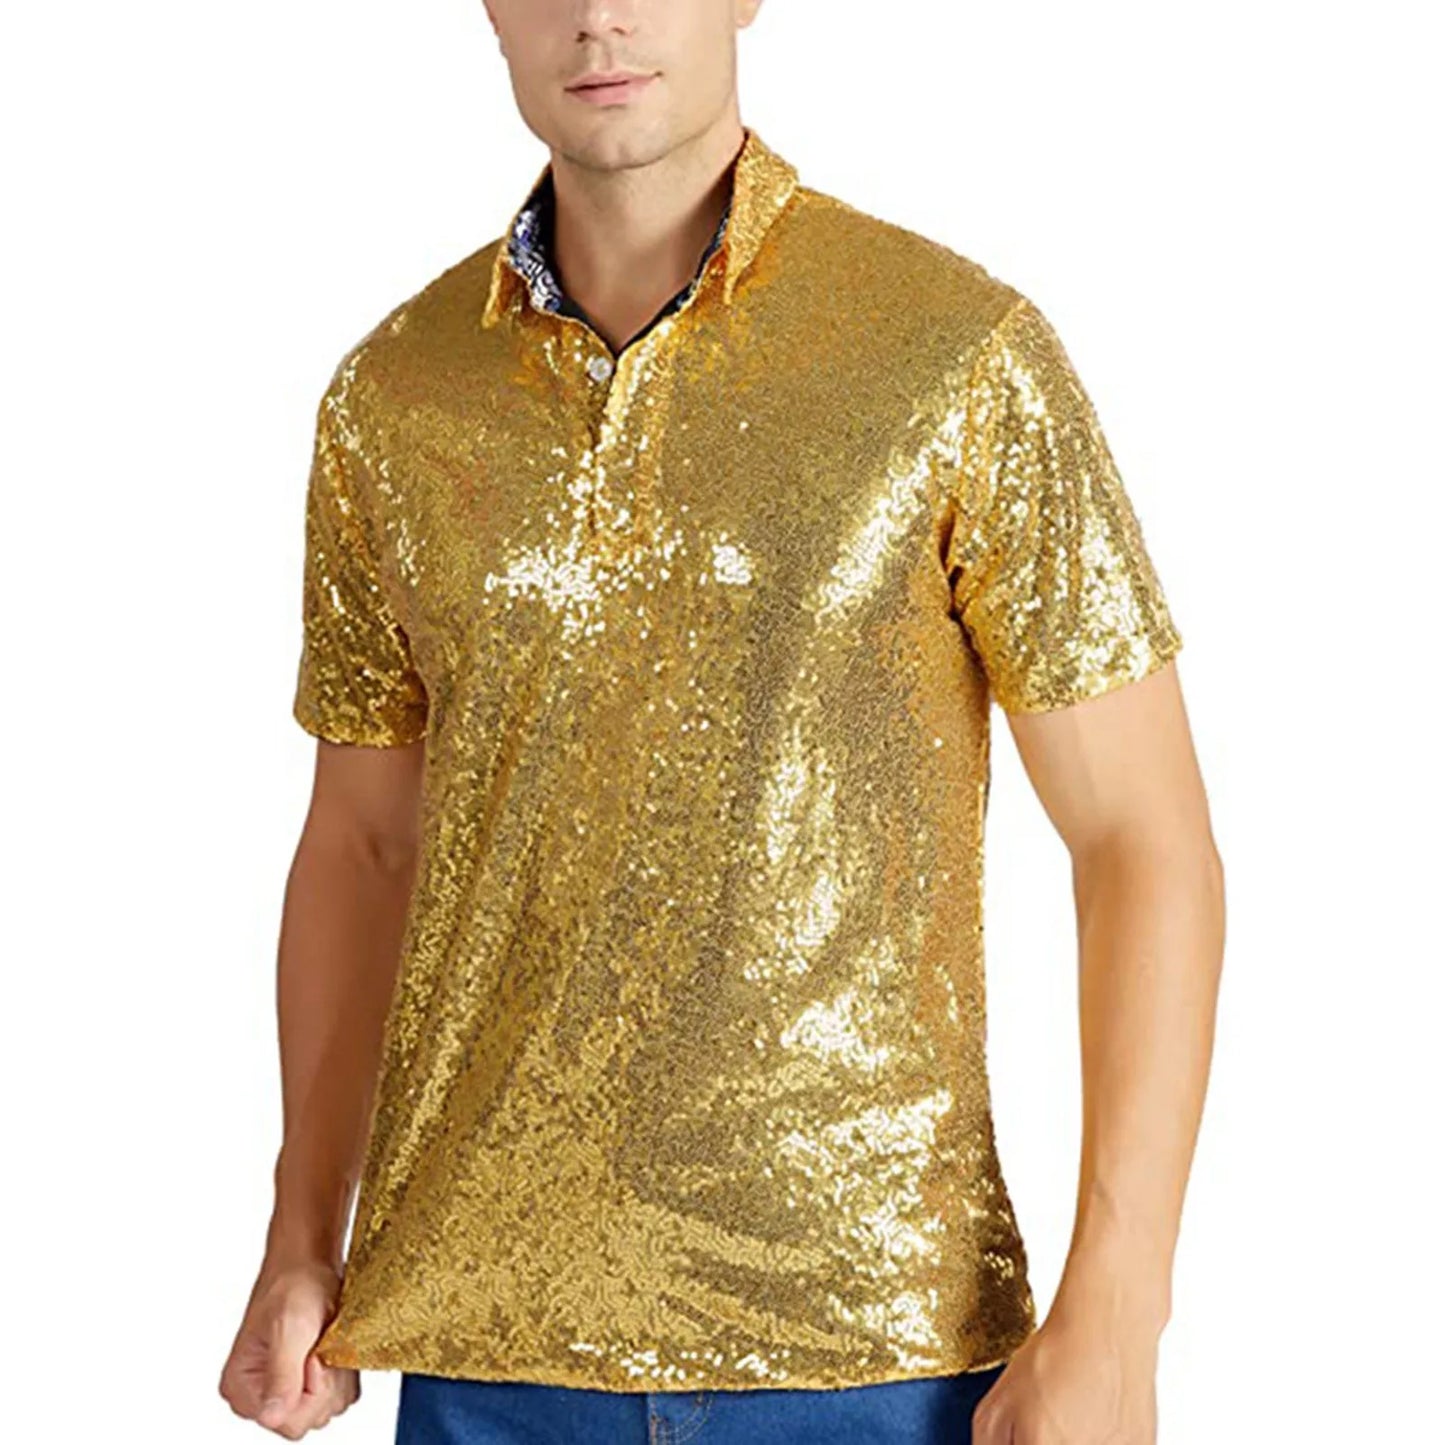 Men's Relaxed Short Sleeve Turndown Sparkles Sequins Polos Shirts 70s Disco Nightclub Party